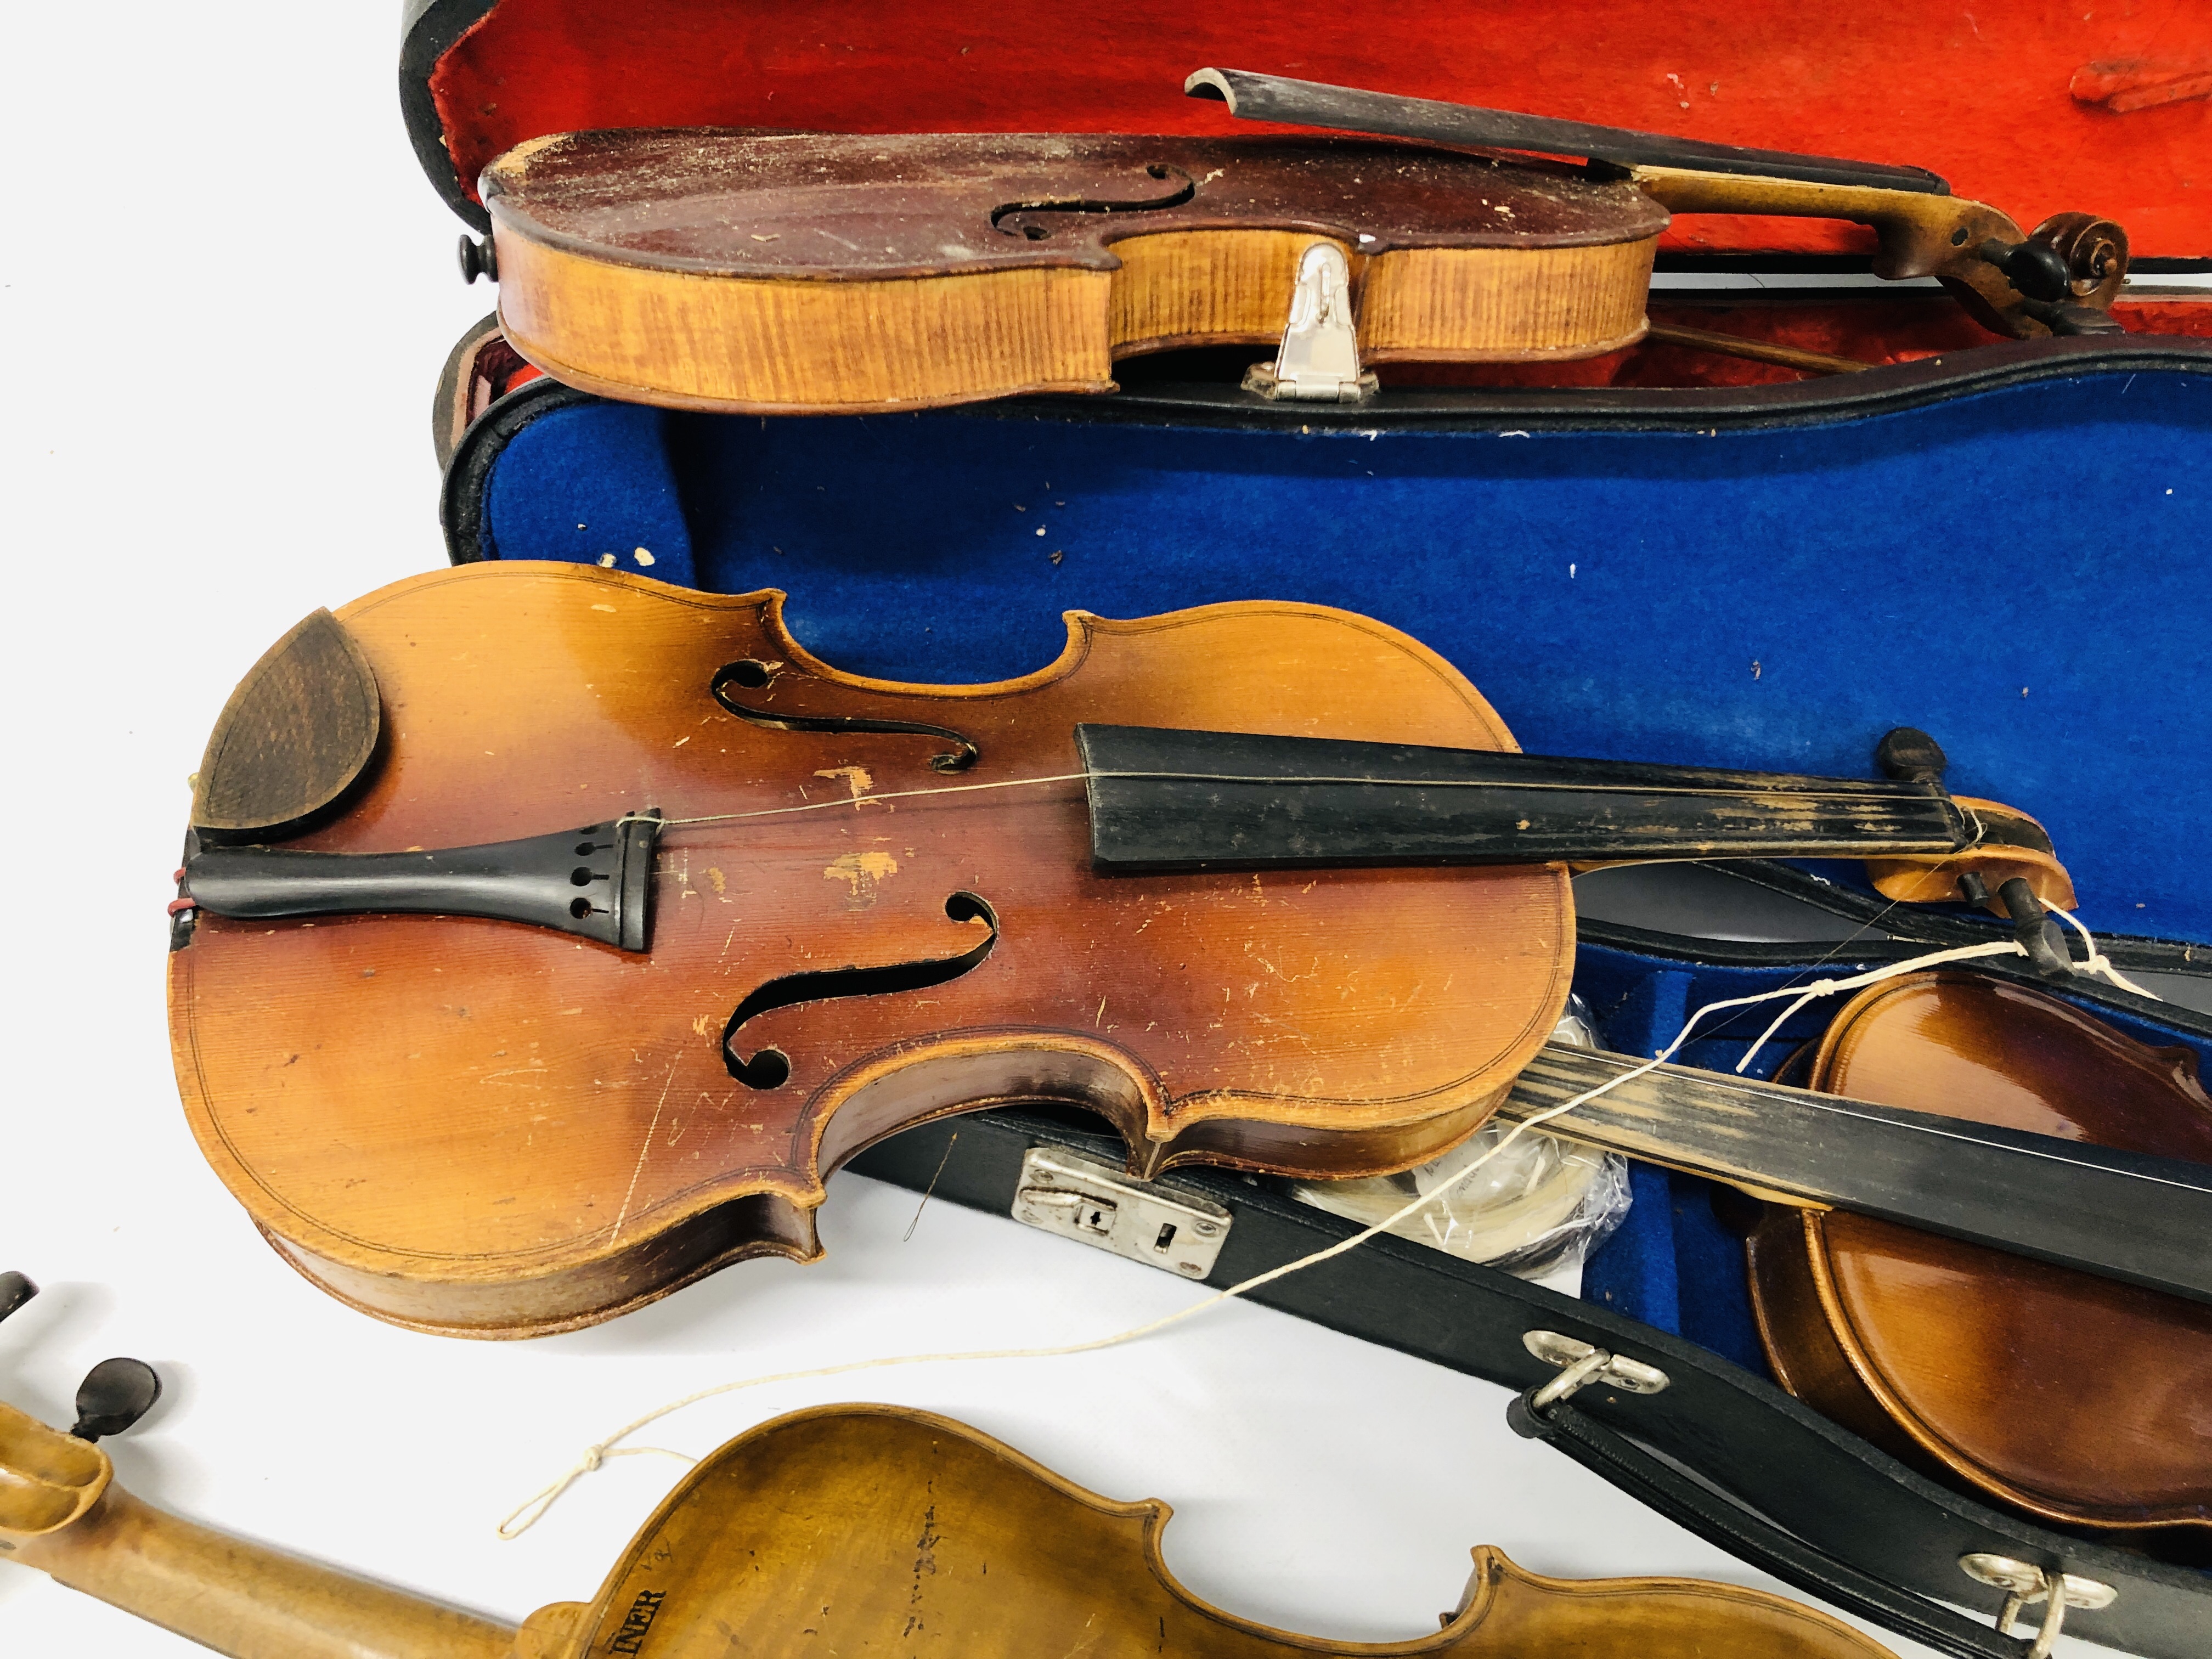 4 X VINTAGE VIOLINS AND 2 WOODEN CASES, VARIOUS BOWS (NO STRINGS) FOR RESTORATION. - Image 5 of 20